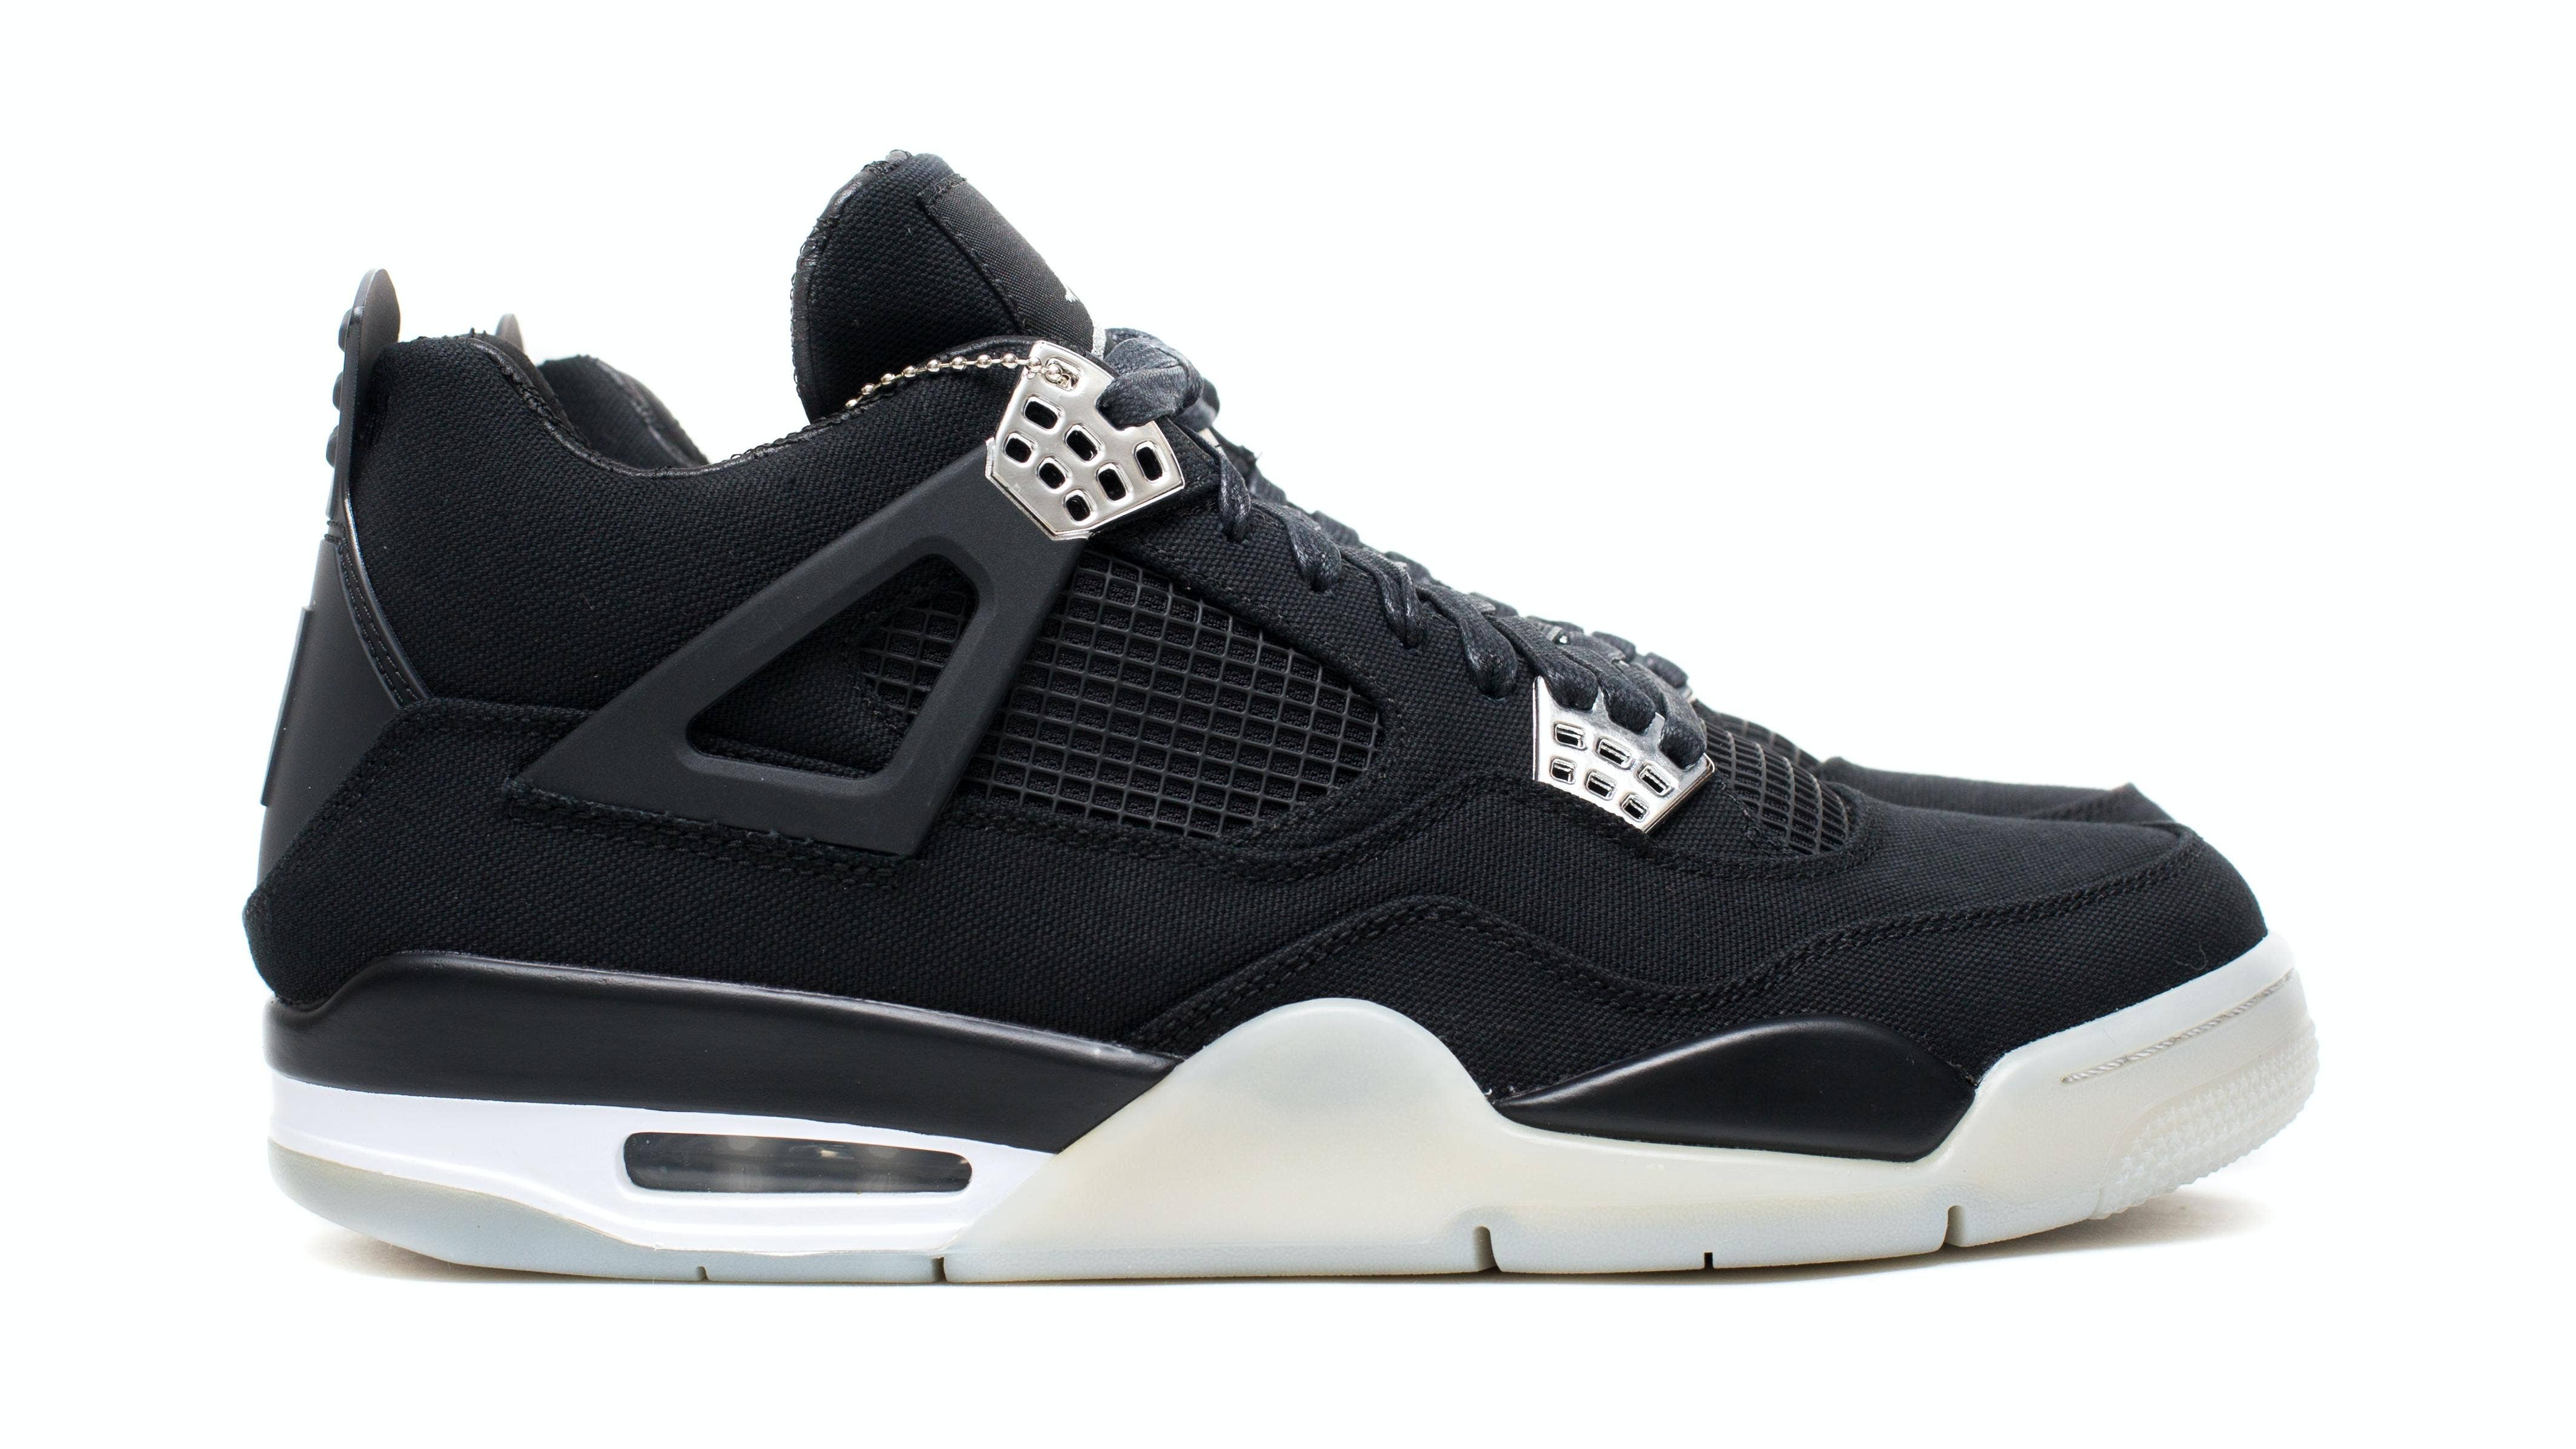 Modsige himmelsk firkant Eminem's Carhartt Air Jordan 4s Available for as Low as $10 | Complex